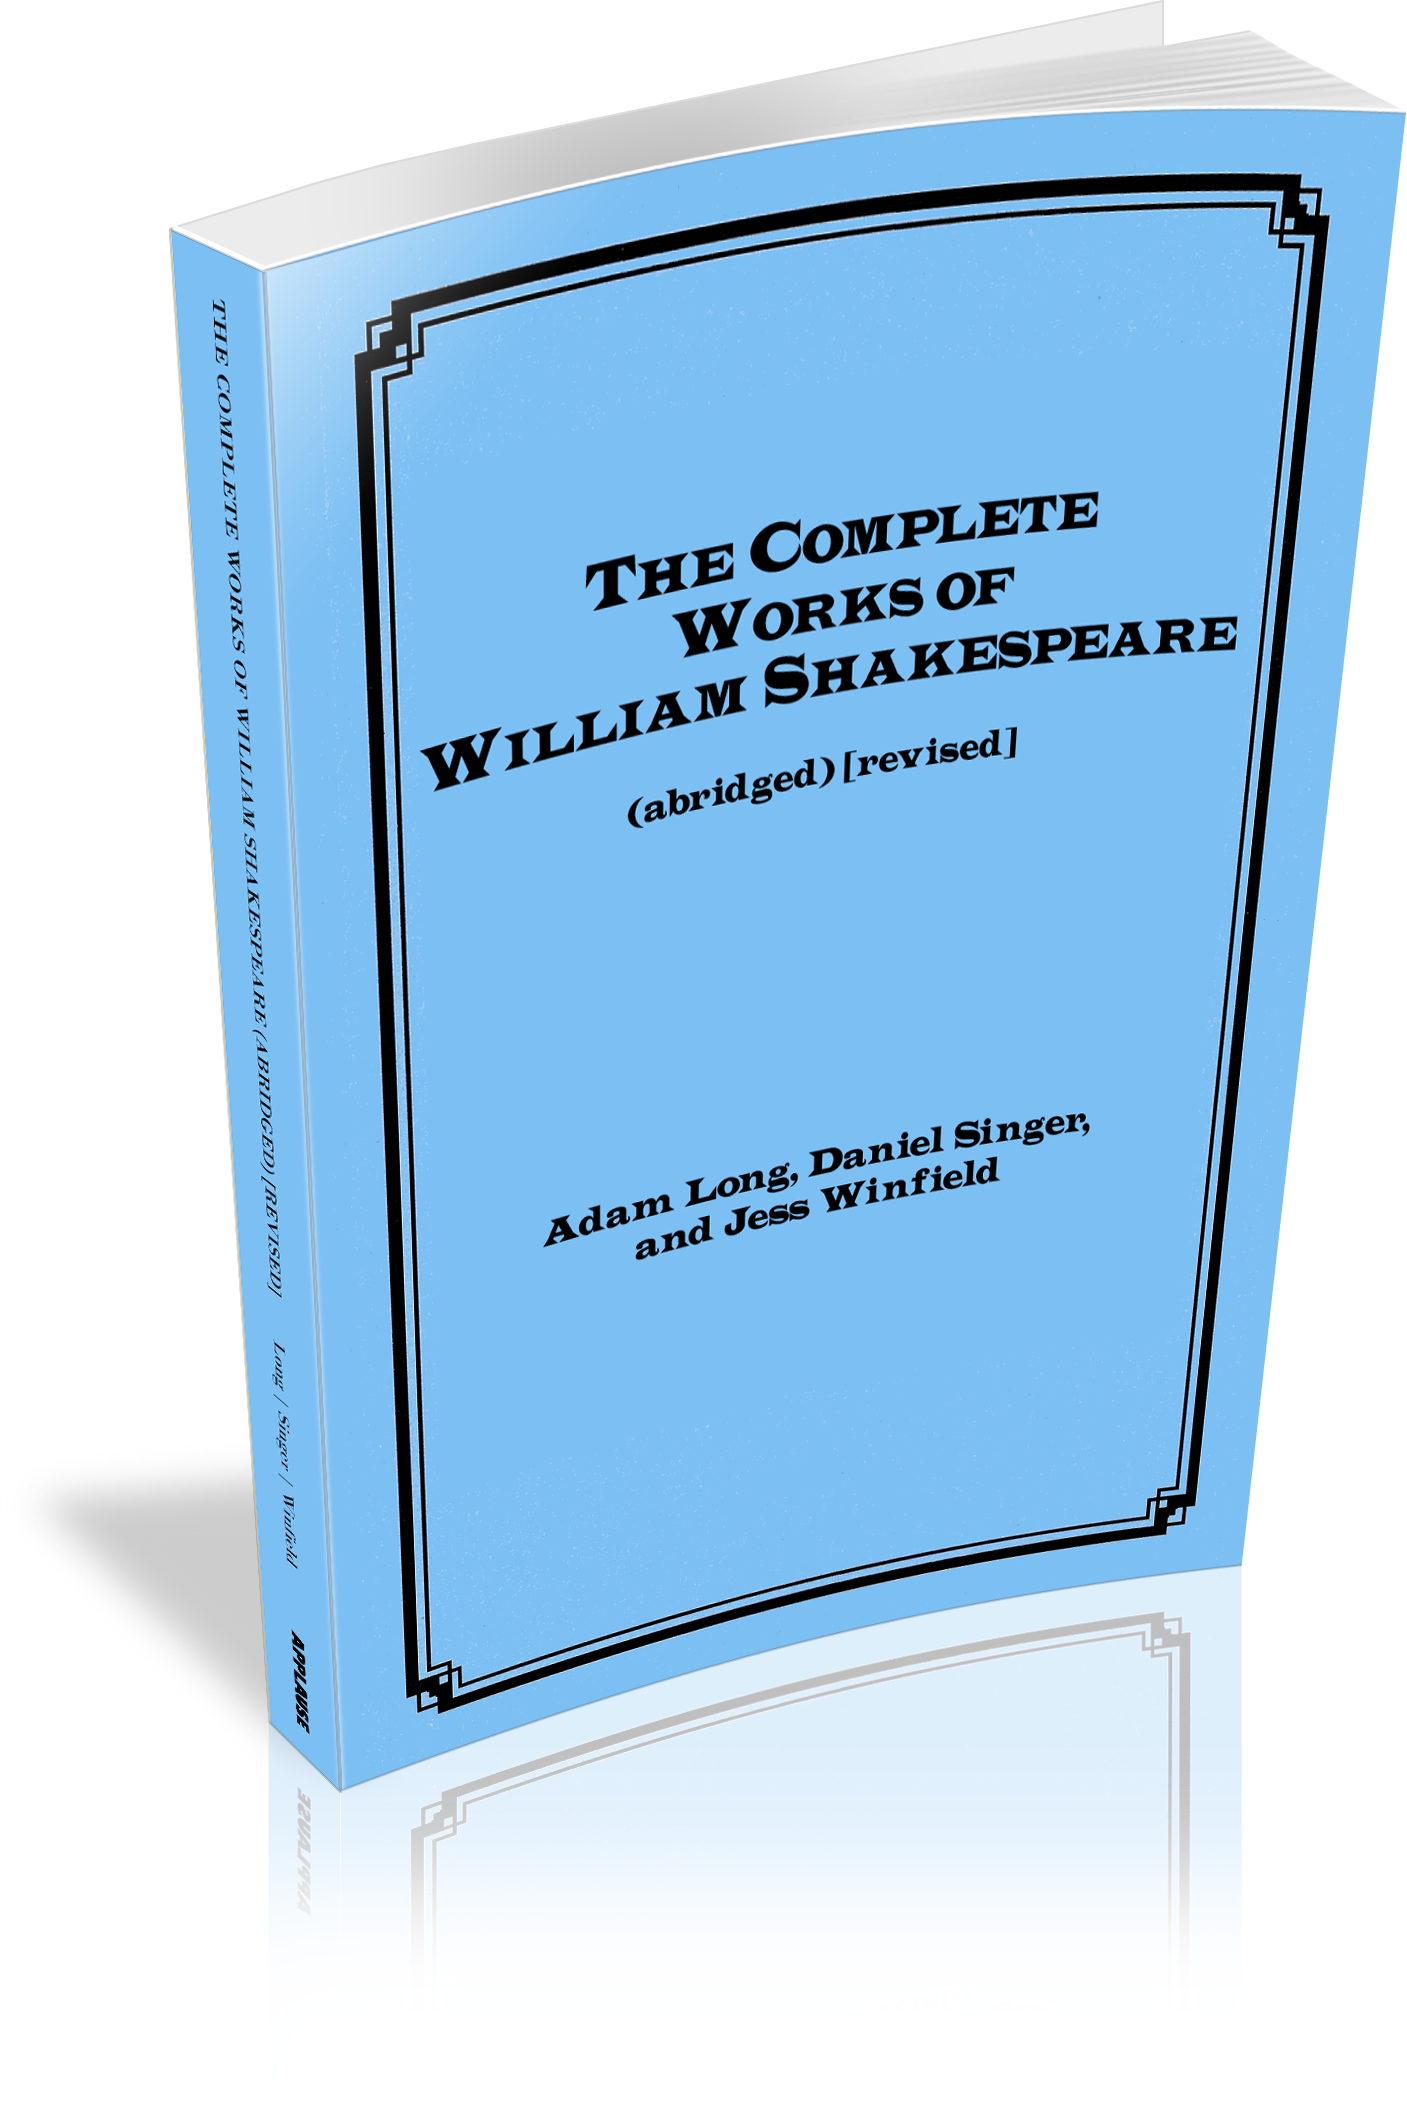 The Complete Works of William Shakespeare (abridged) revised